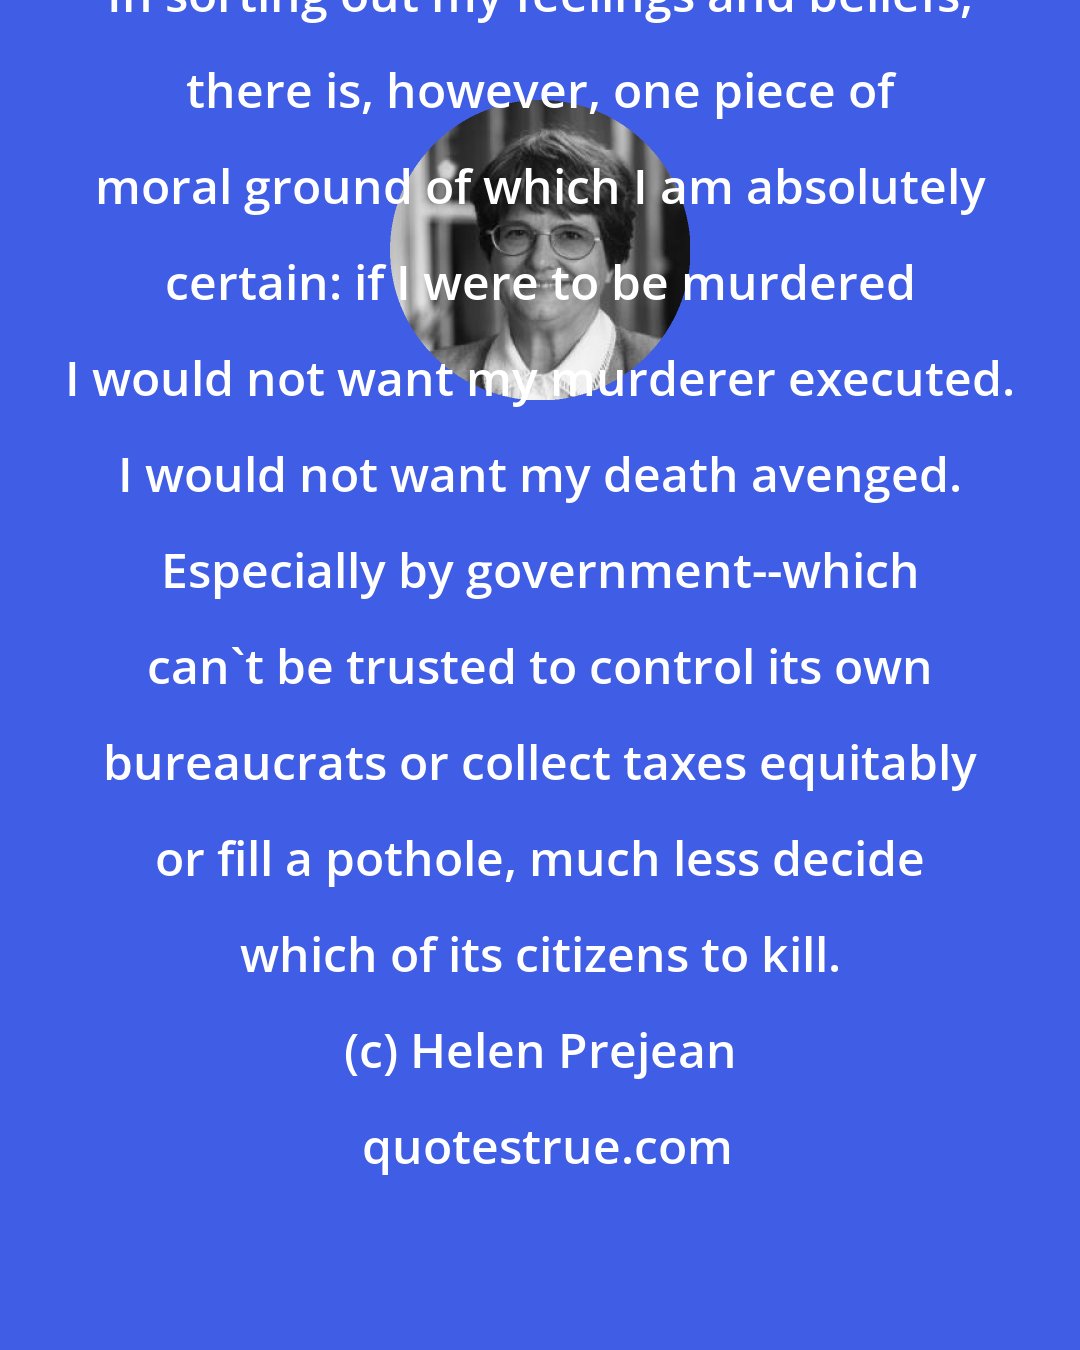 Helen Prejean: In sorting out my feelings and beliefs, there is, however, one piece of moral ground of which I am absolutely certain: if I were to be murdered I would not want my murderer executed. I would not want my death avenged. Especially by government--which can't be trusted to control its own bureaucrats or collect taxes equitably or fill a pothole, much less decide which of its citizens to kill.